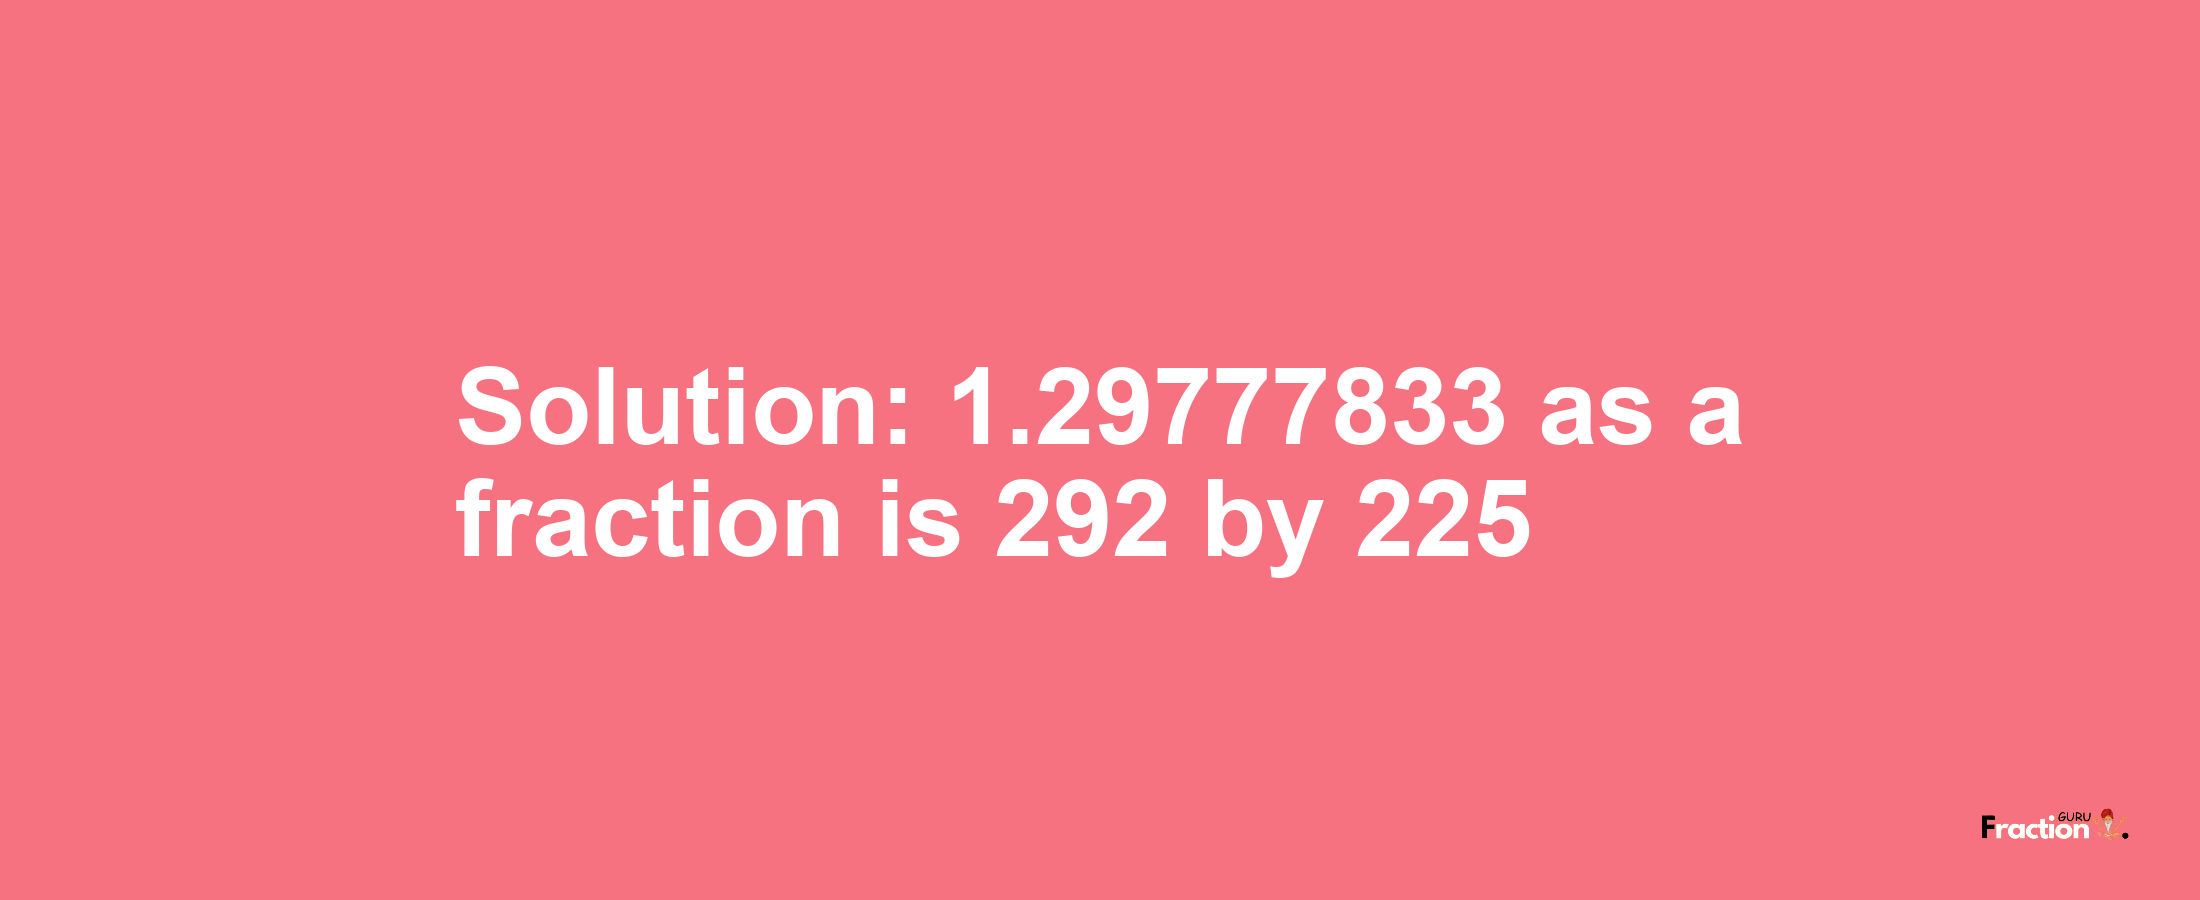 Solution:1.29777833 as a fraction is 292/225